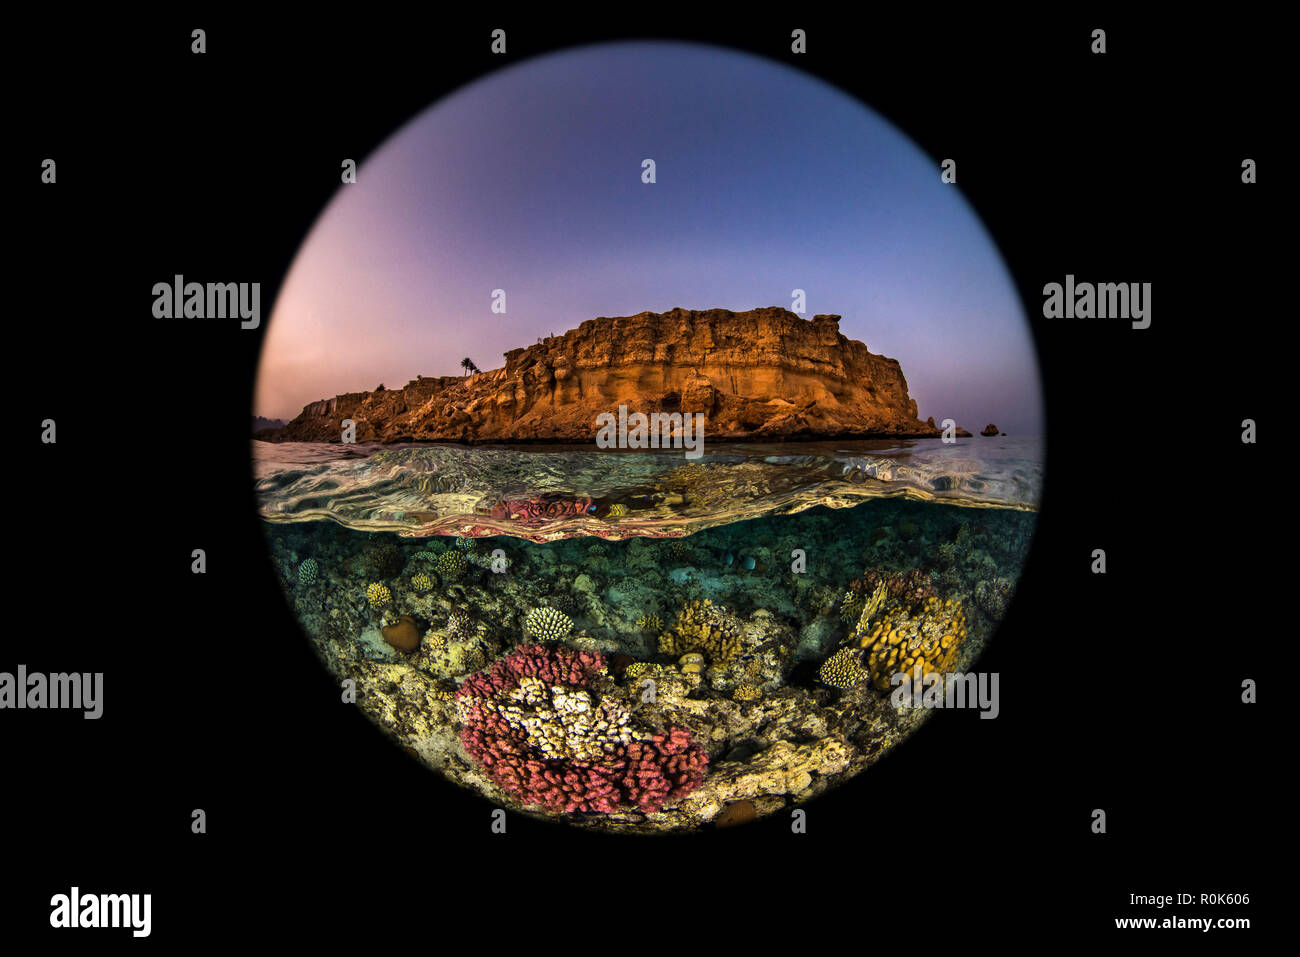 A beautiful coral reef sits just under the surface of the water near a desert mountain. Stock Photo